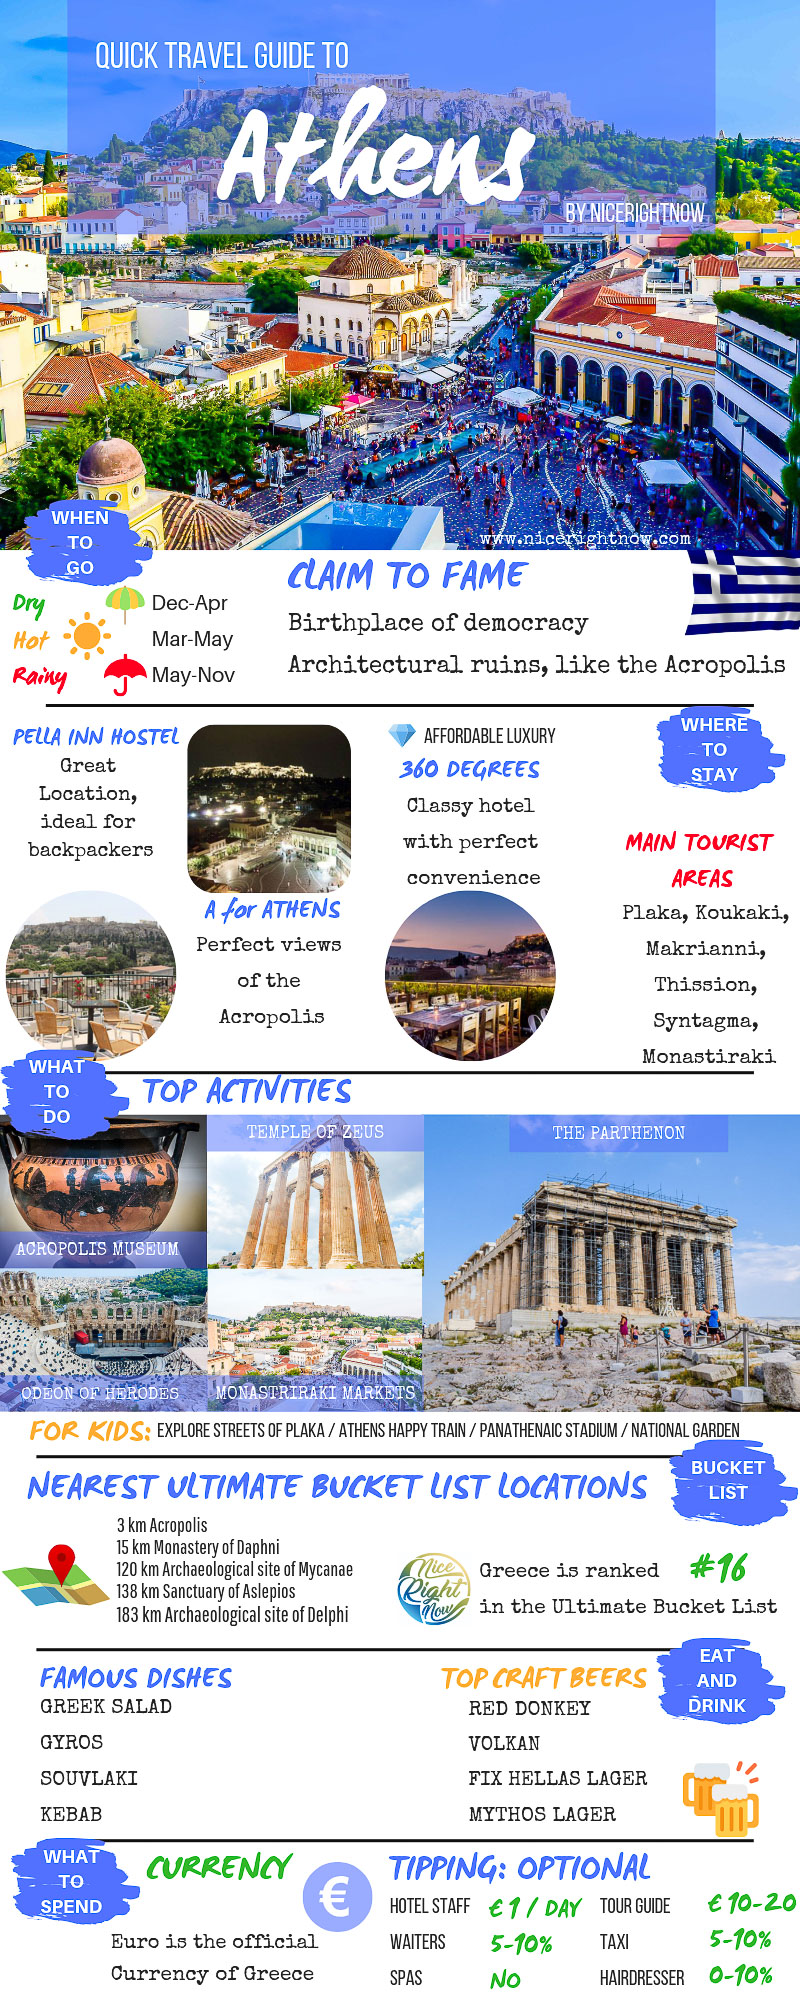 athens greece trip cost